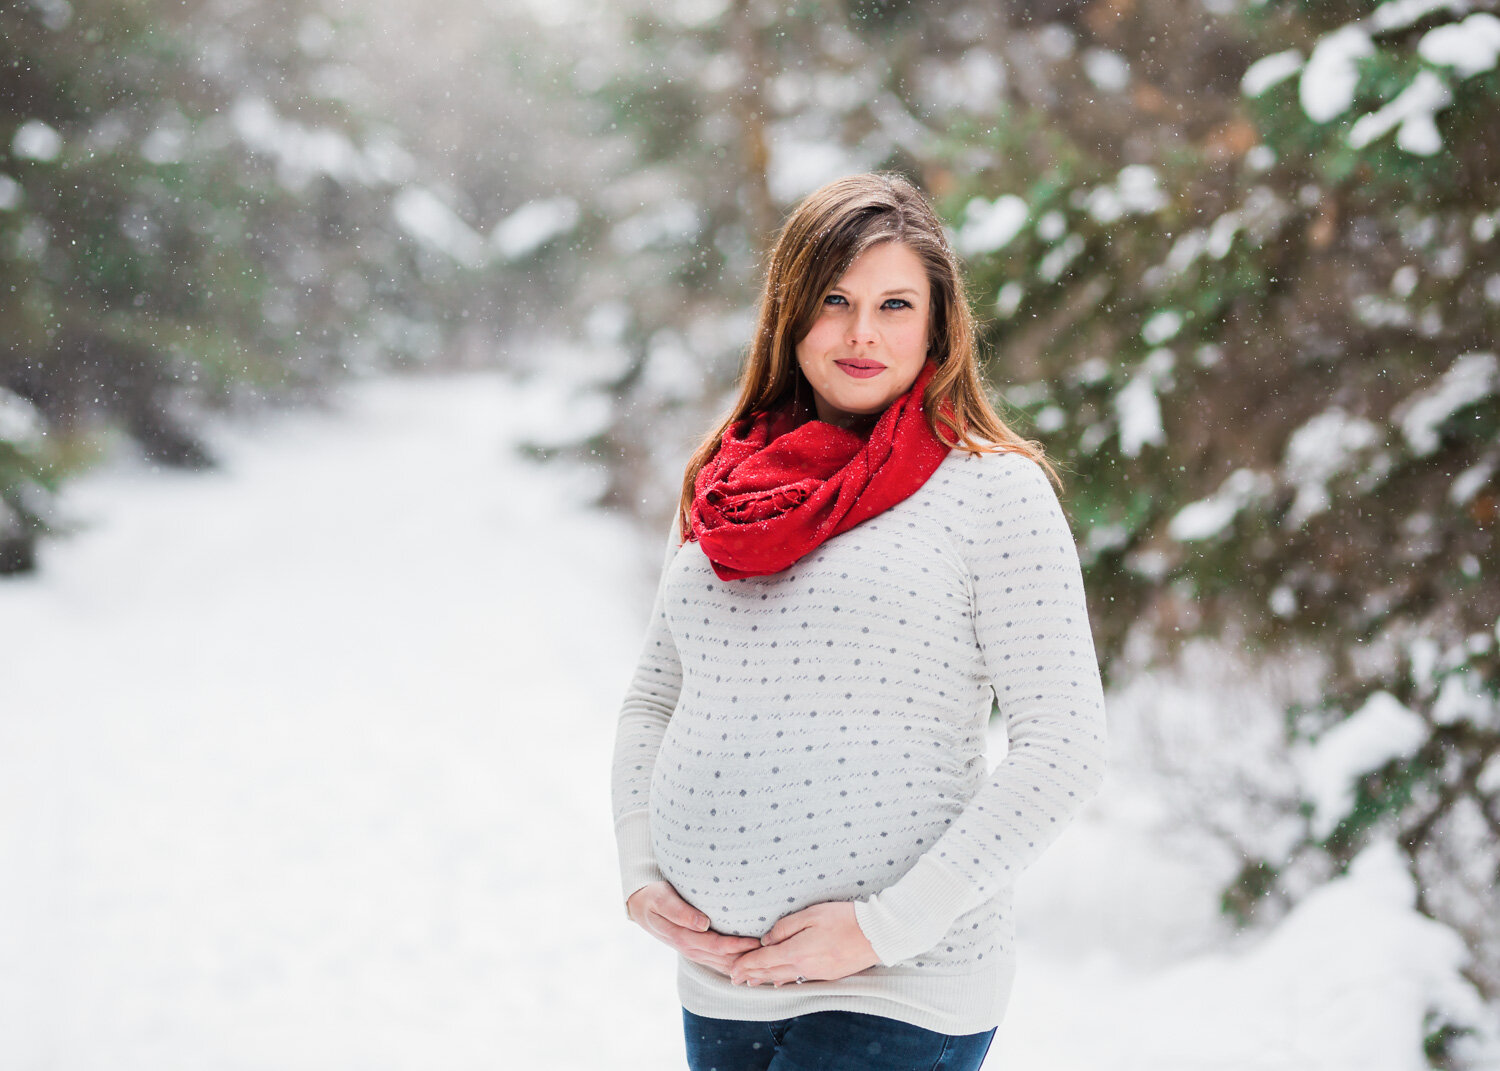  Beautiful pregnant woman smiling for maternity photos in the snowy everygreens near Winnipeg 